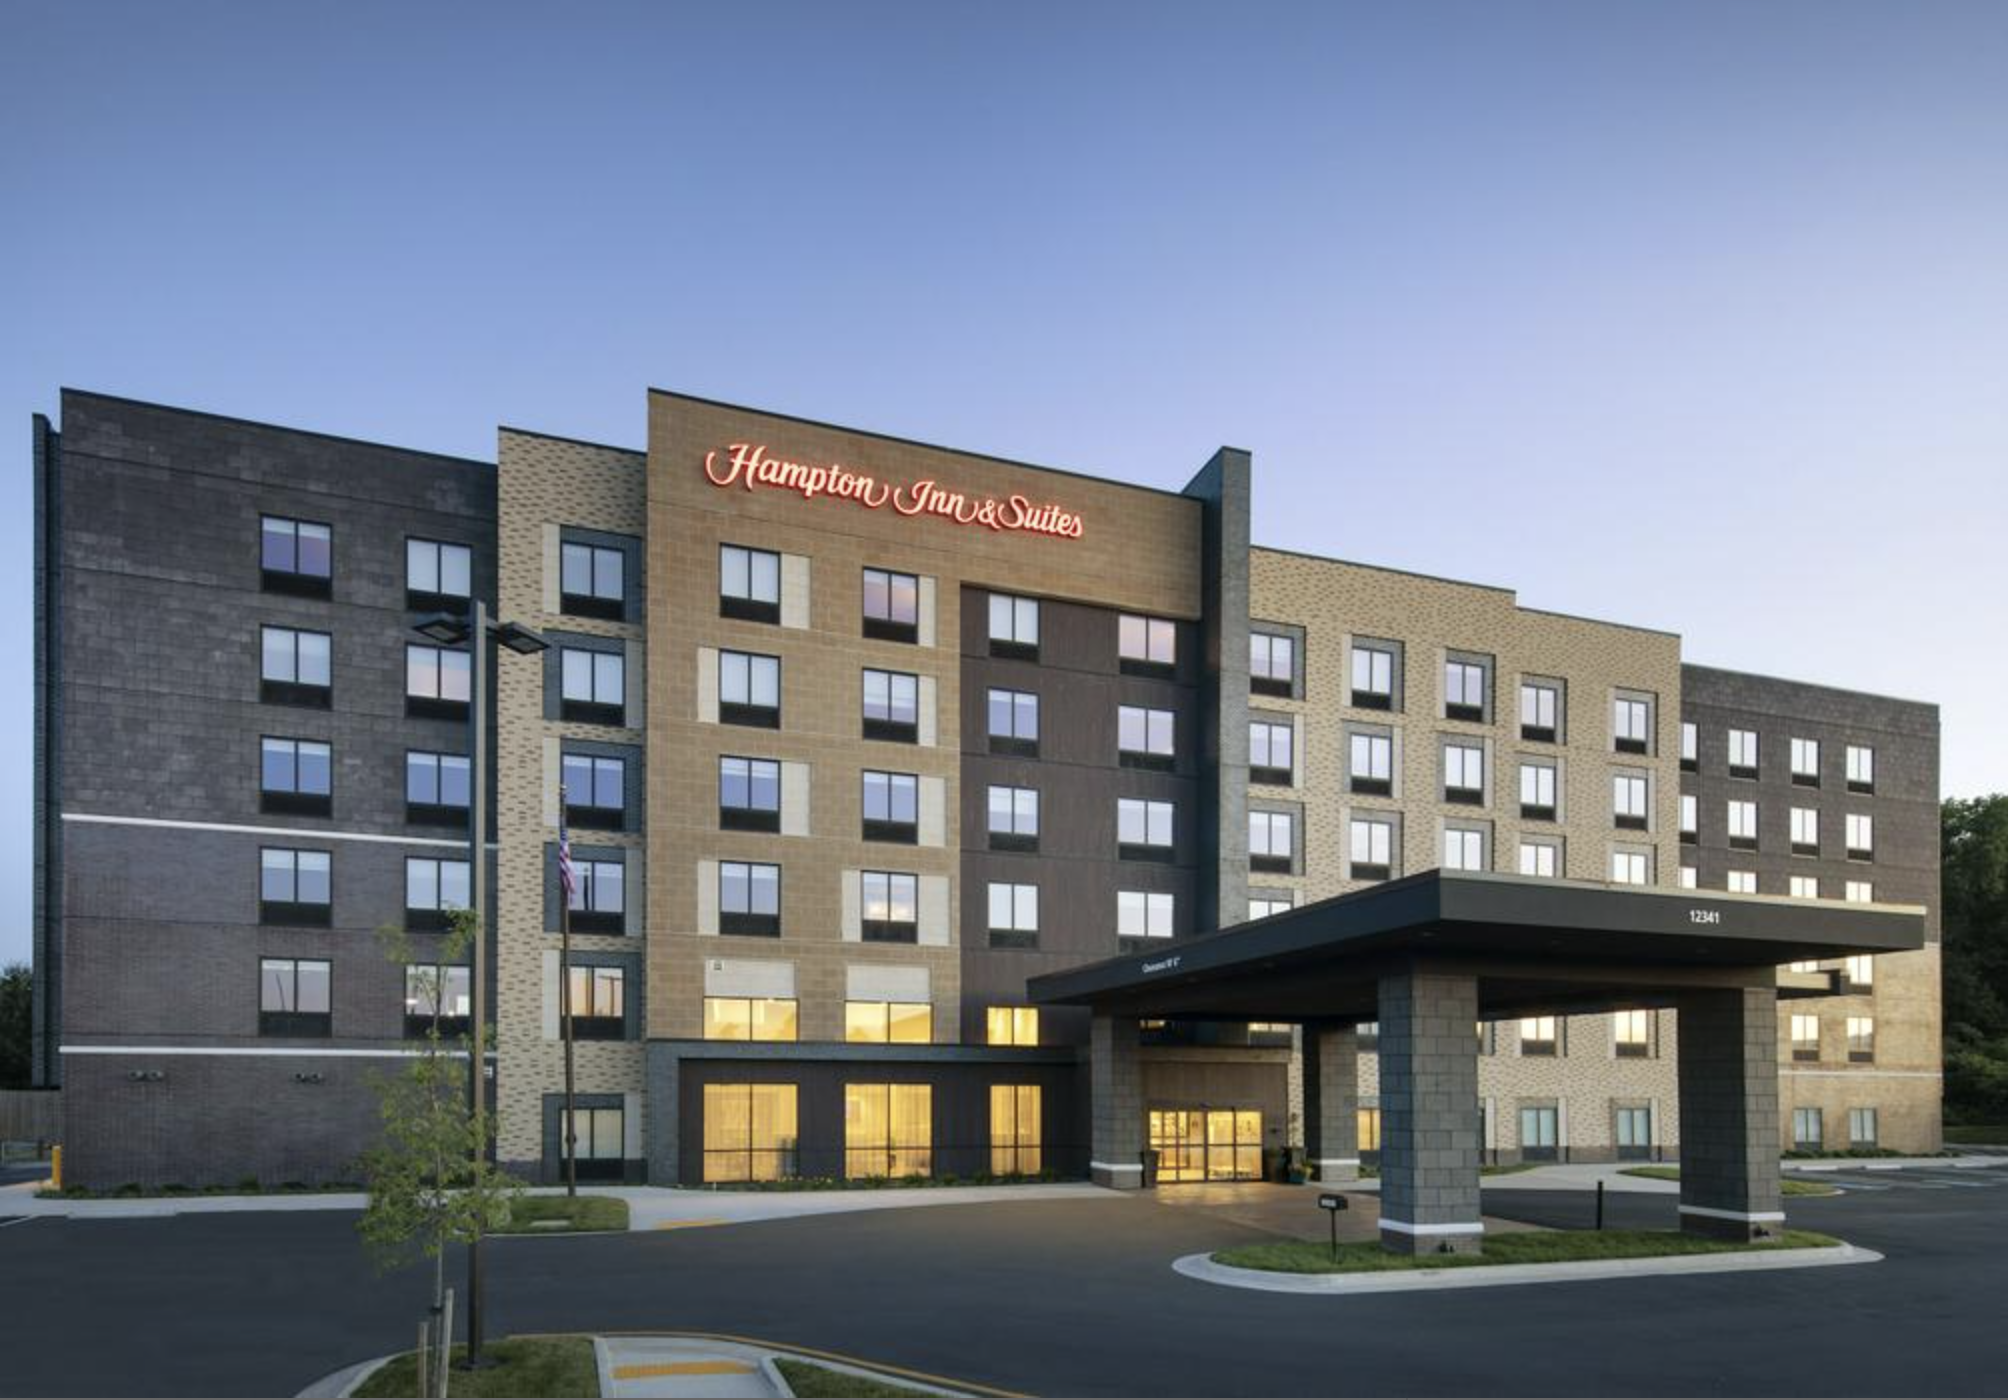 Shamin Hotels Announces The Opening Of The New Hampton Inn and Suites Richmond Short Pump